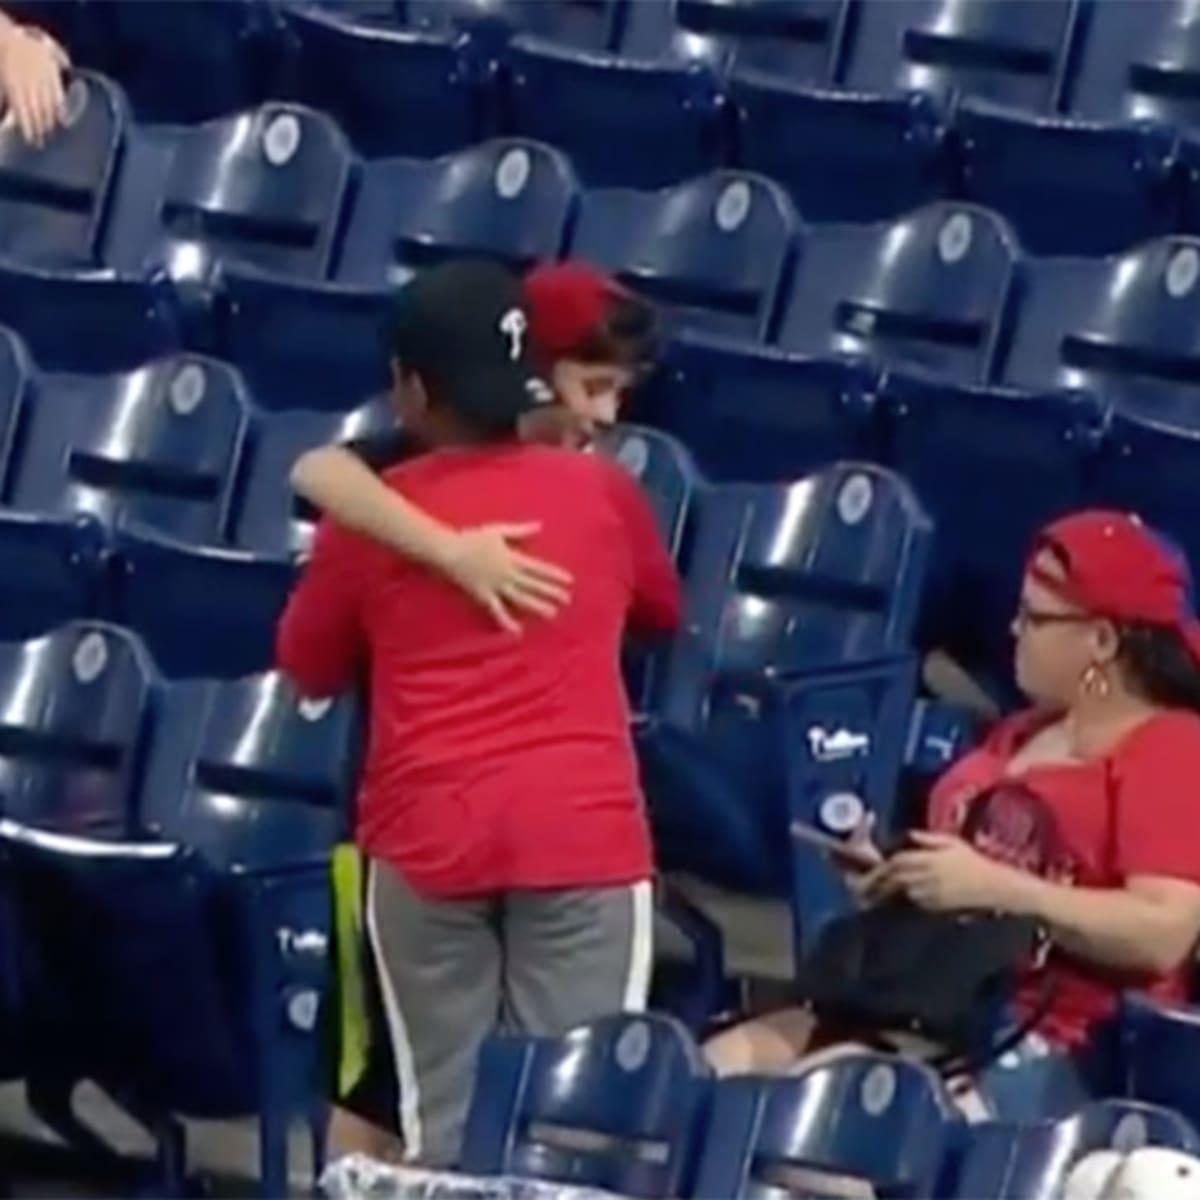 Young Phillies fan goes viral for taunting Astros fan